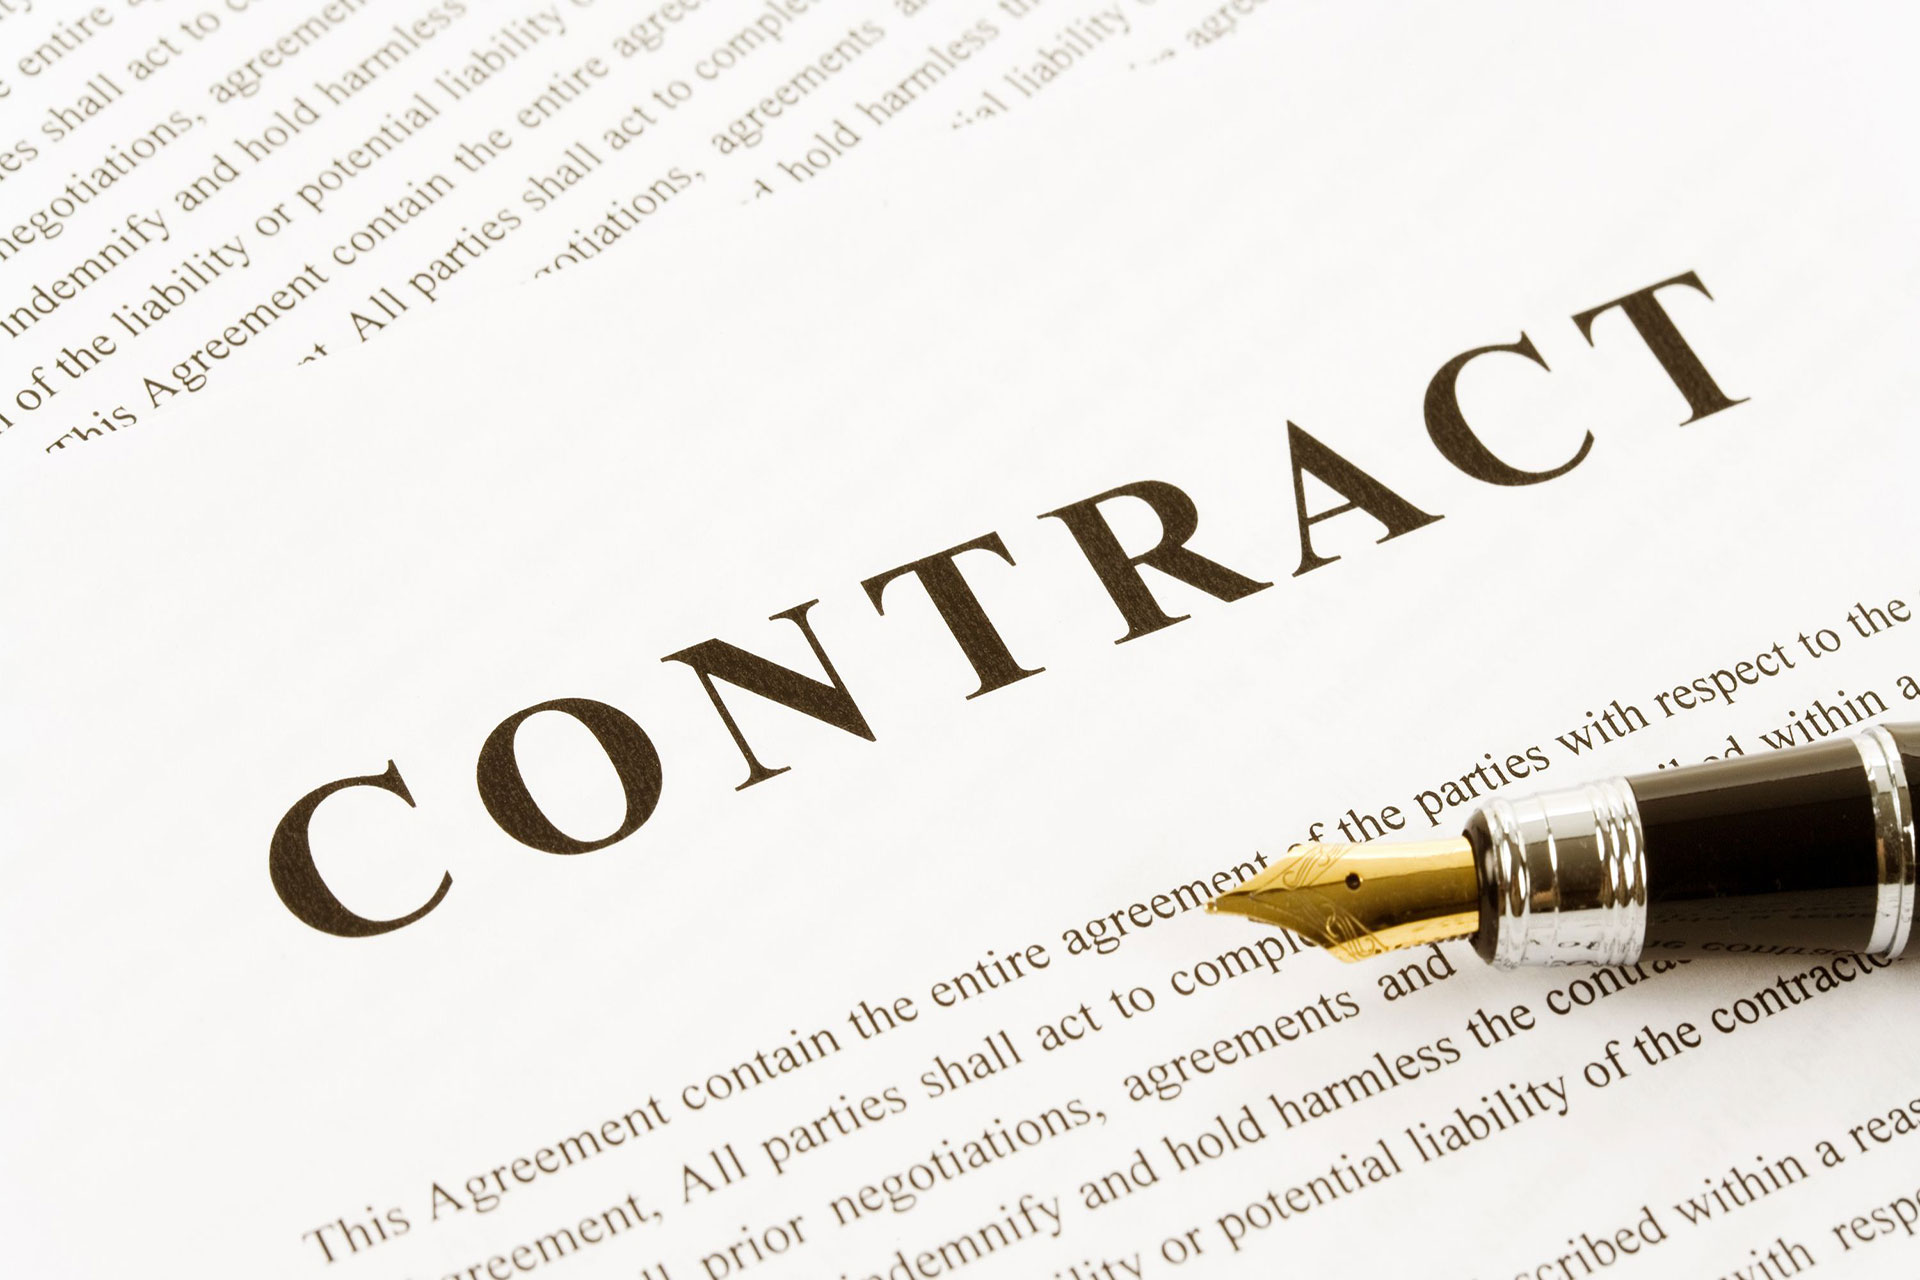 Contract Act